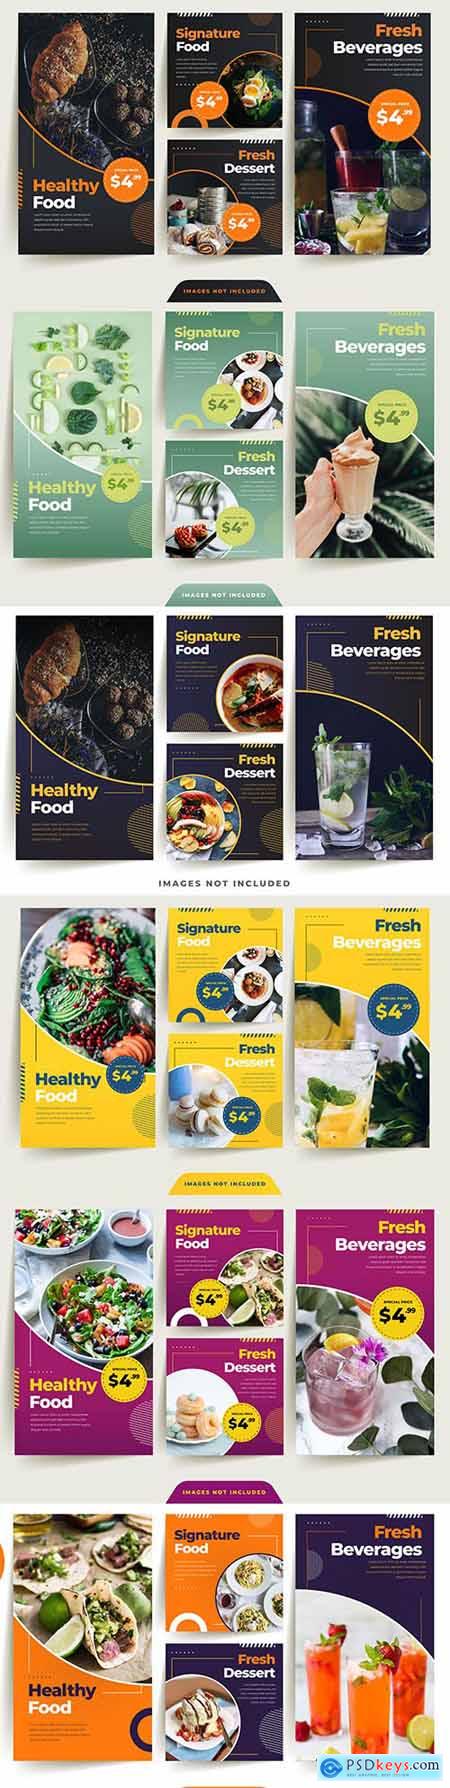 Healthy food sale and special offer design banner social networks